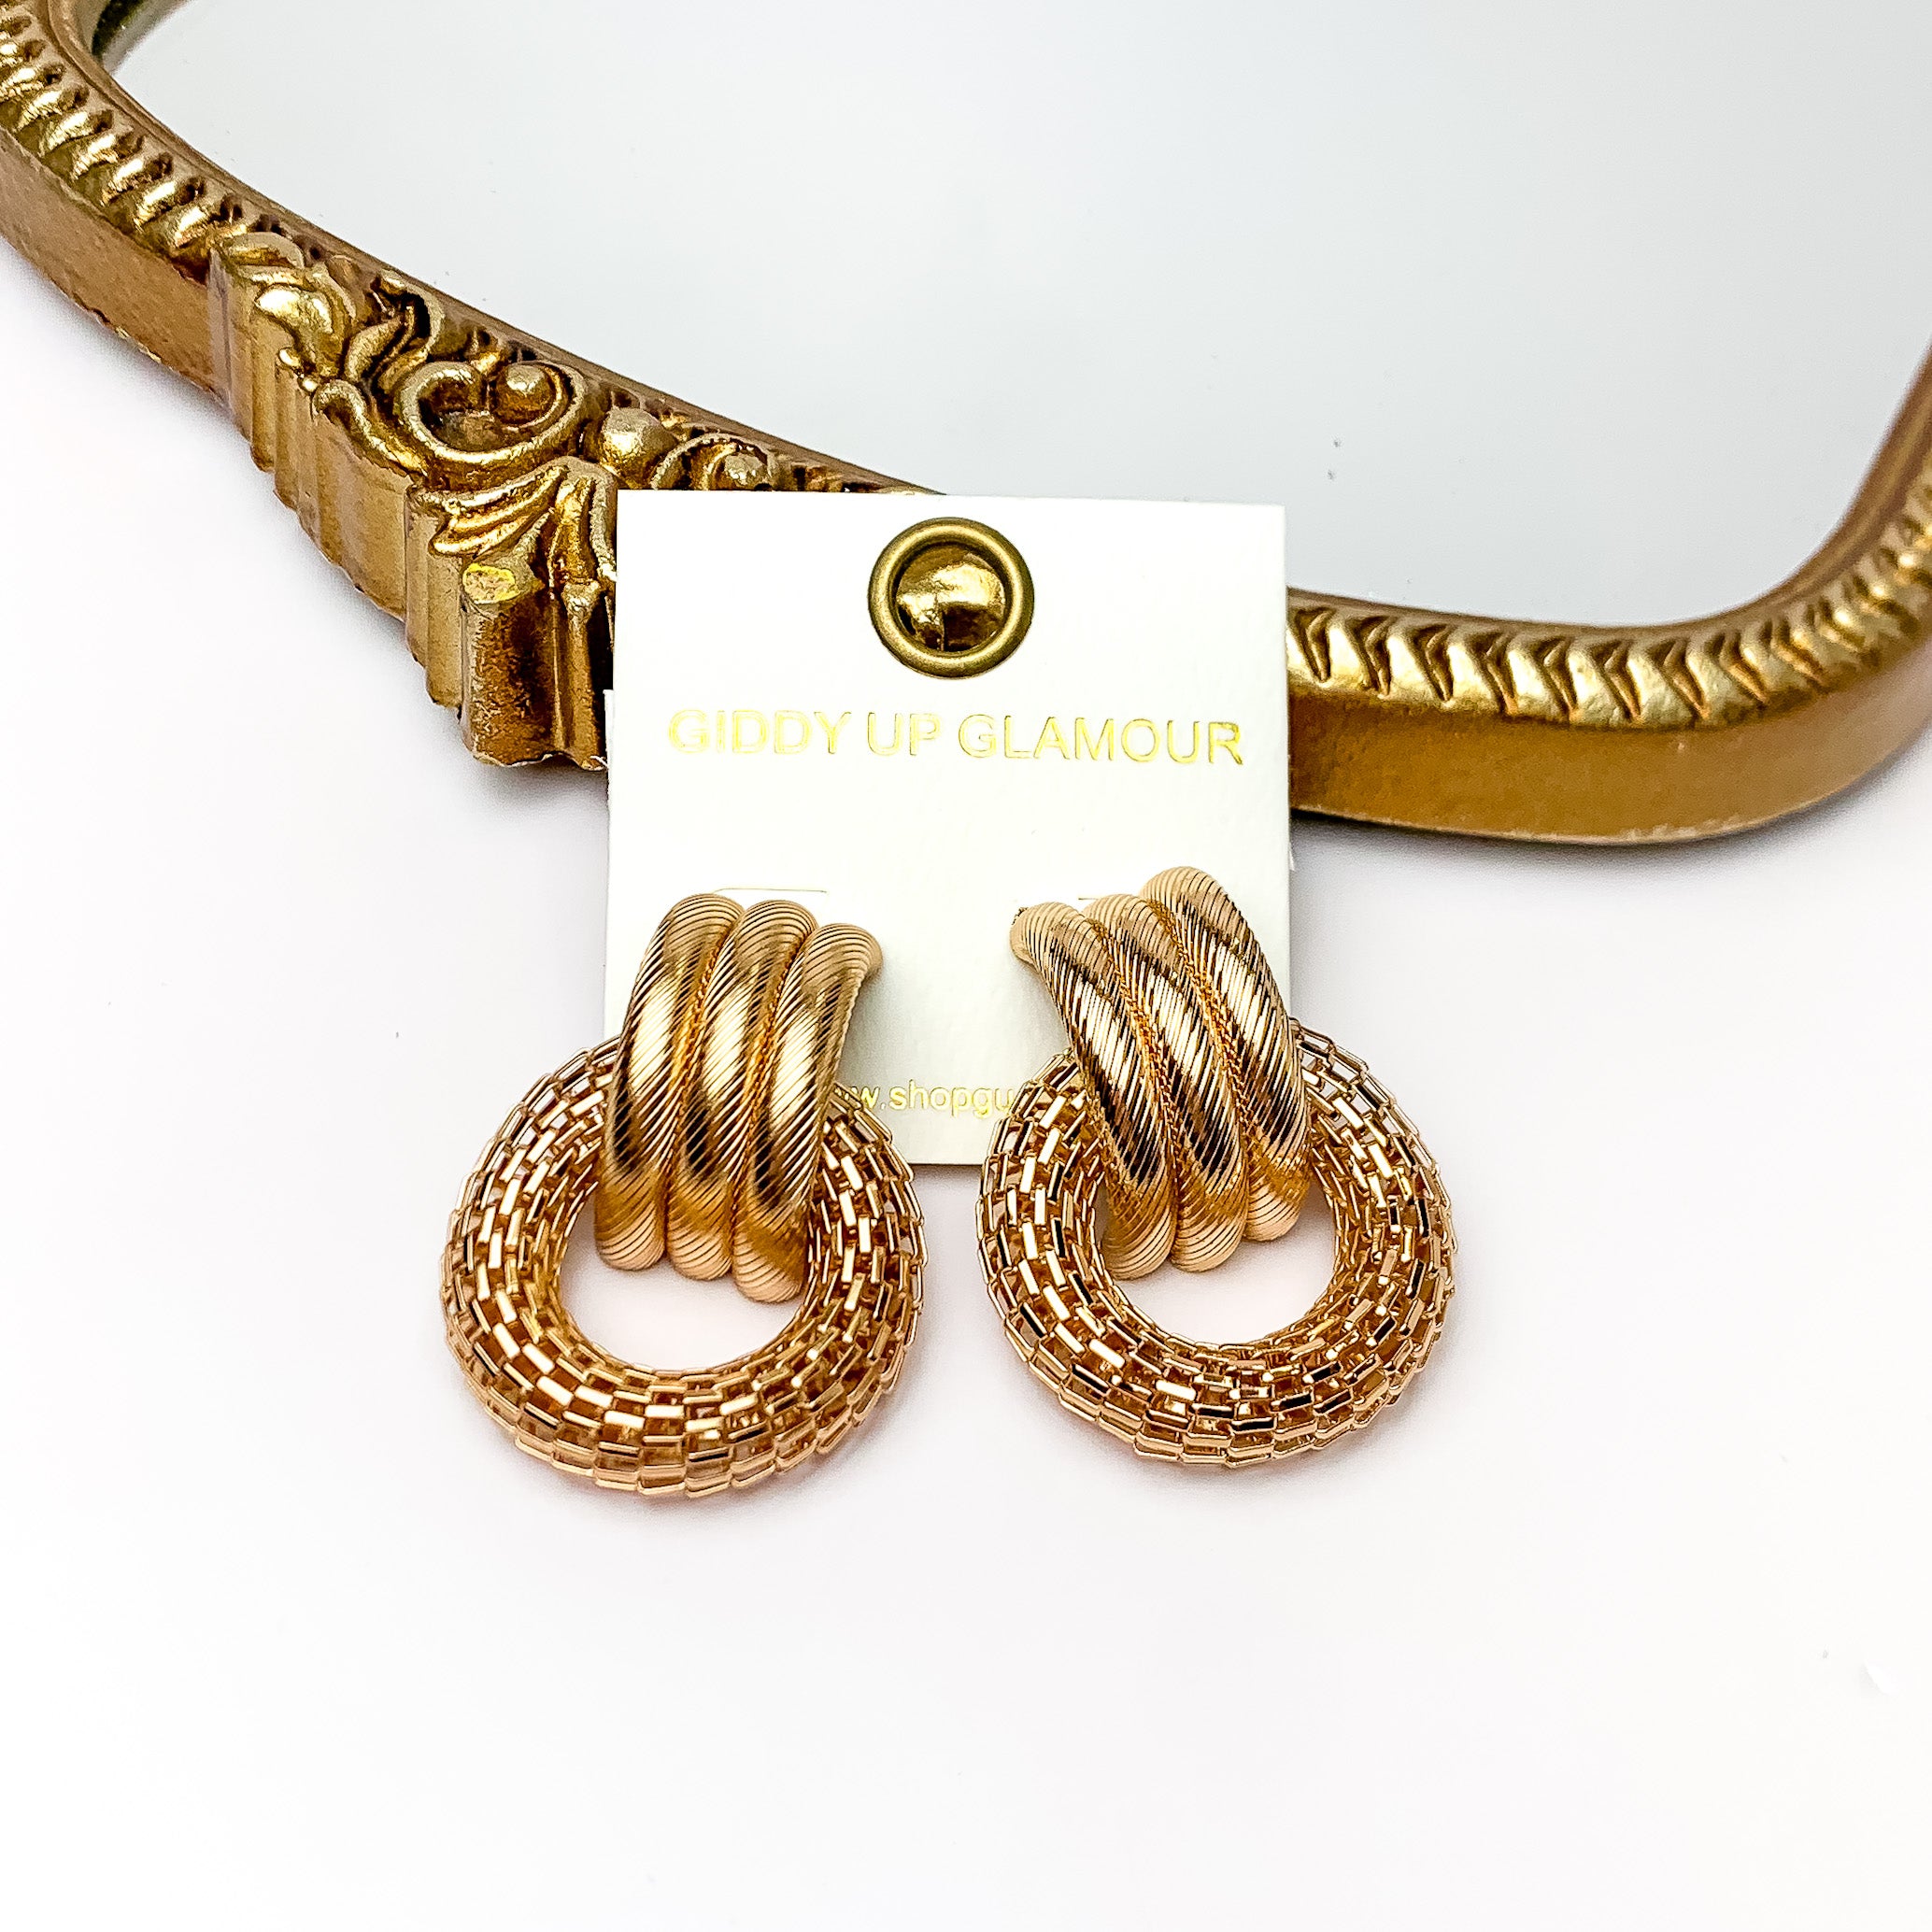 Gold Tone Textured Circle Post Earrings. Pictured on a white background with a gold frame above the earrings.